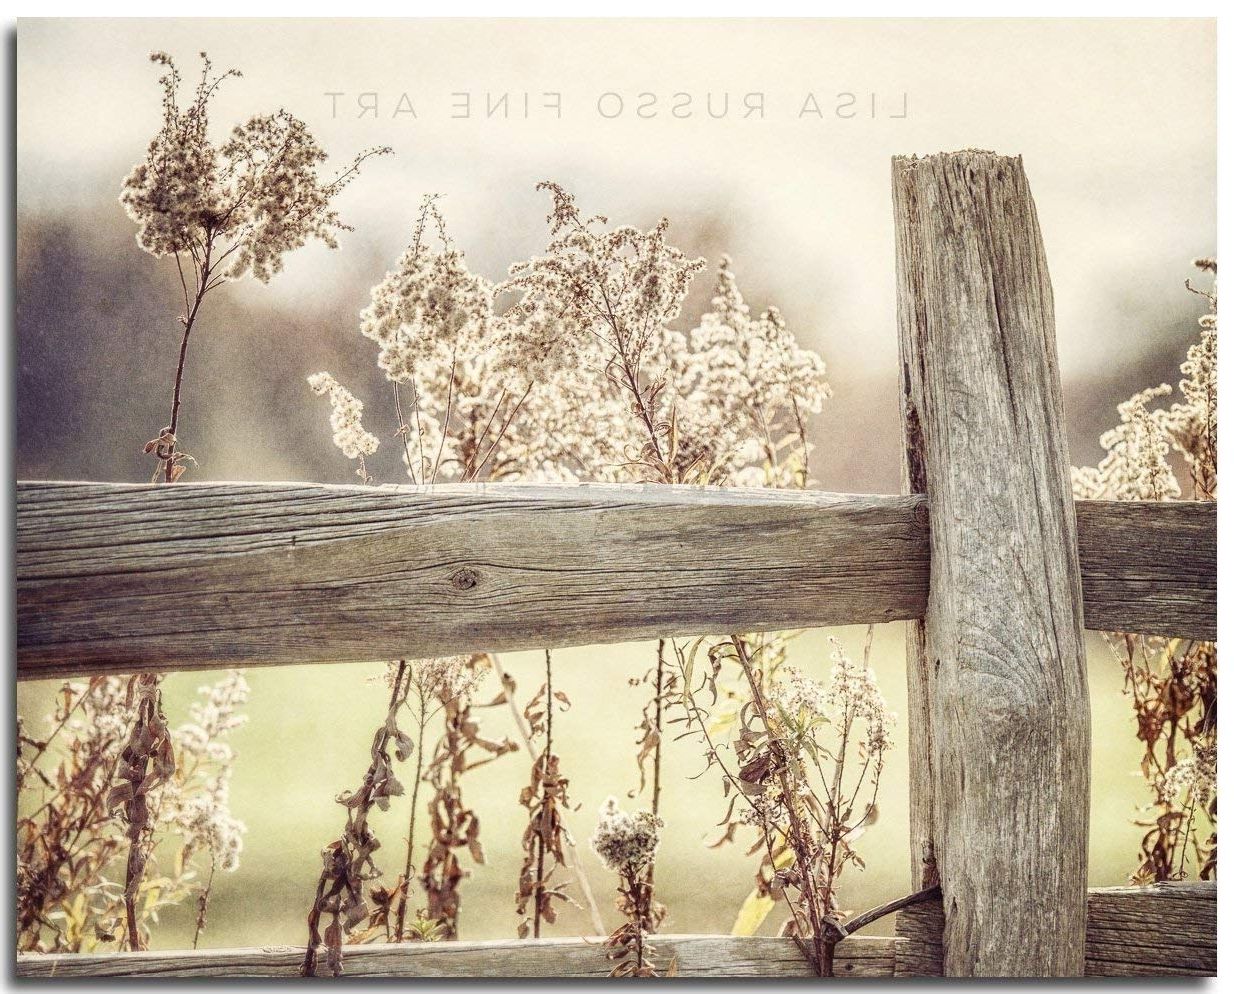 Country Wall Art Pertaining To Most Popular Amazon: Rustic Country Farmhouse Decor, Golden Fence Landscape (View 10 of 20)